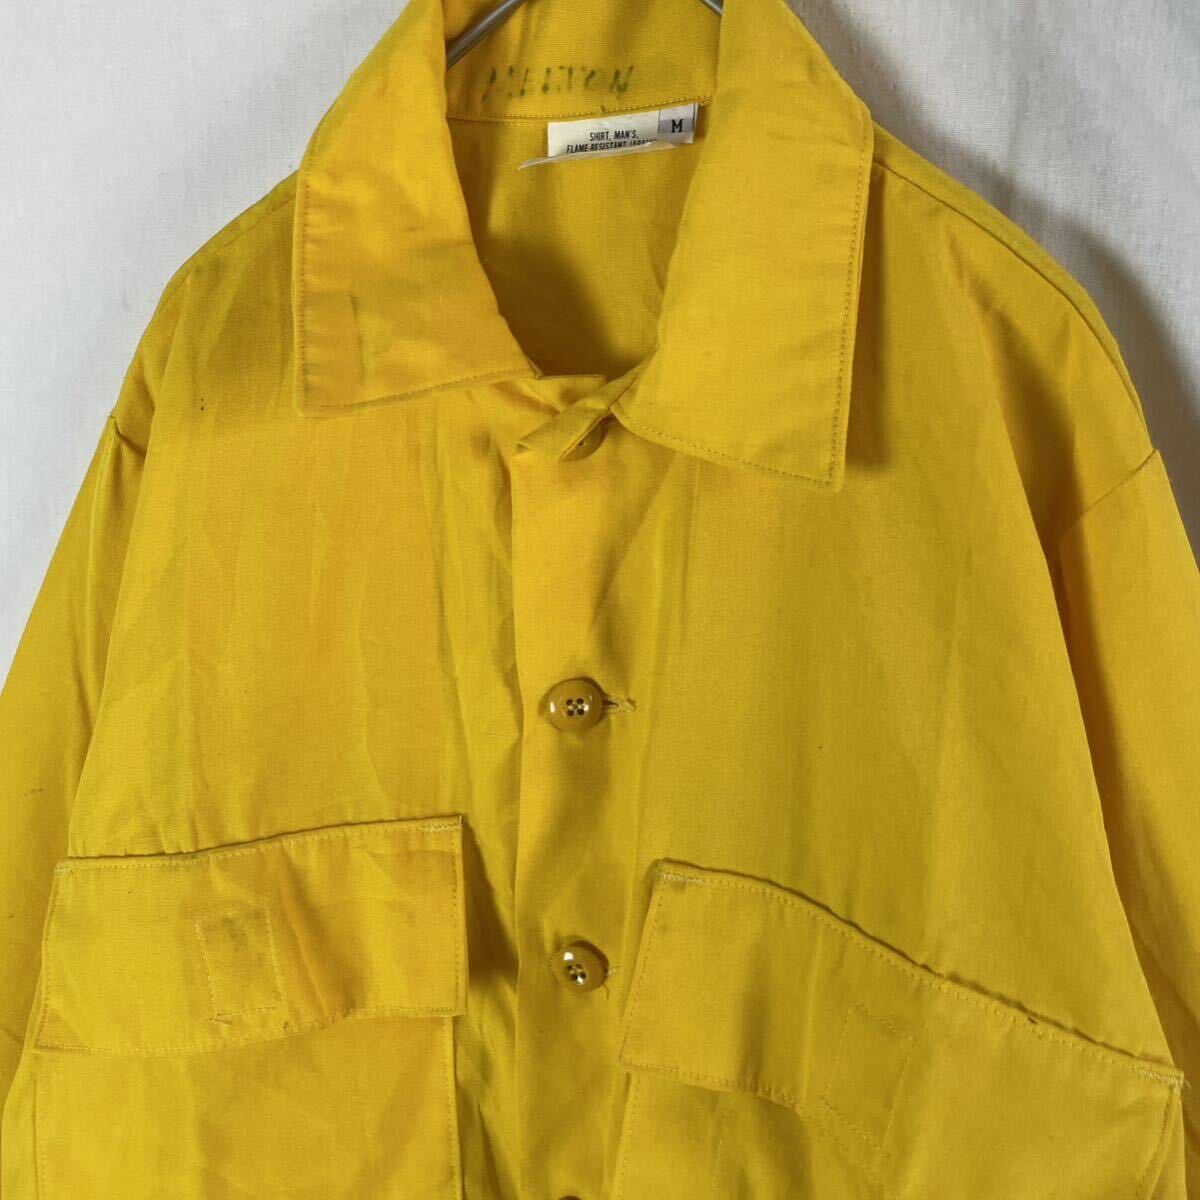 US Forest Service Aramid Flame-Resistant Shirt Mサイズ イエロー 古着 の画像2